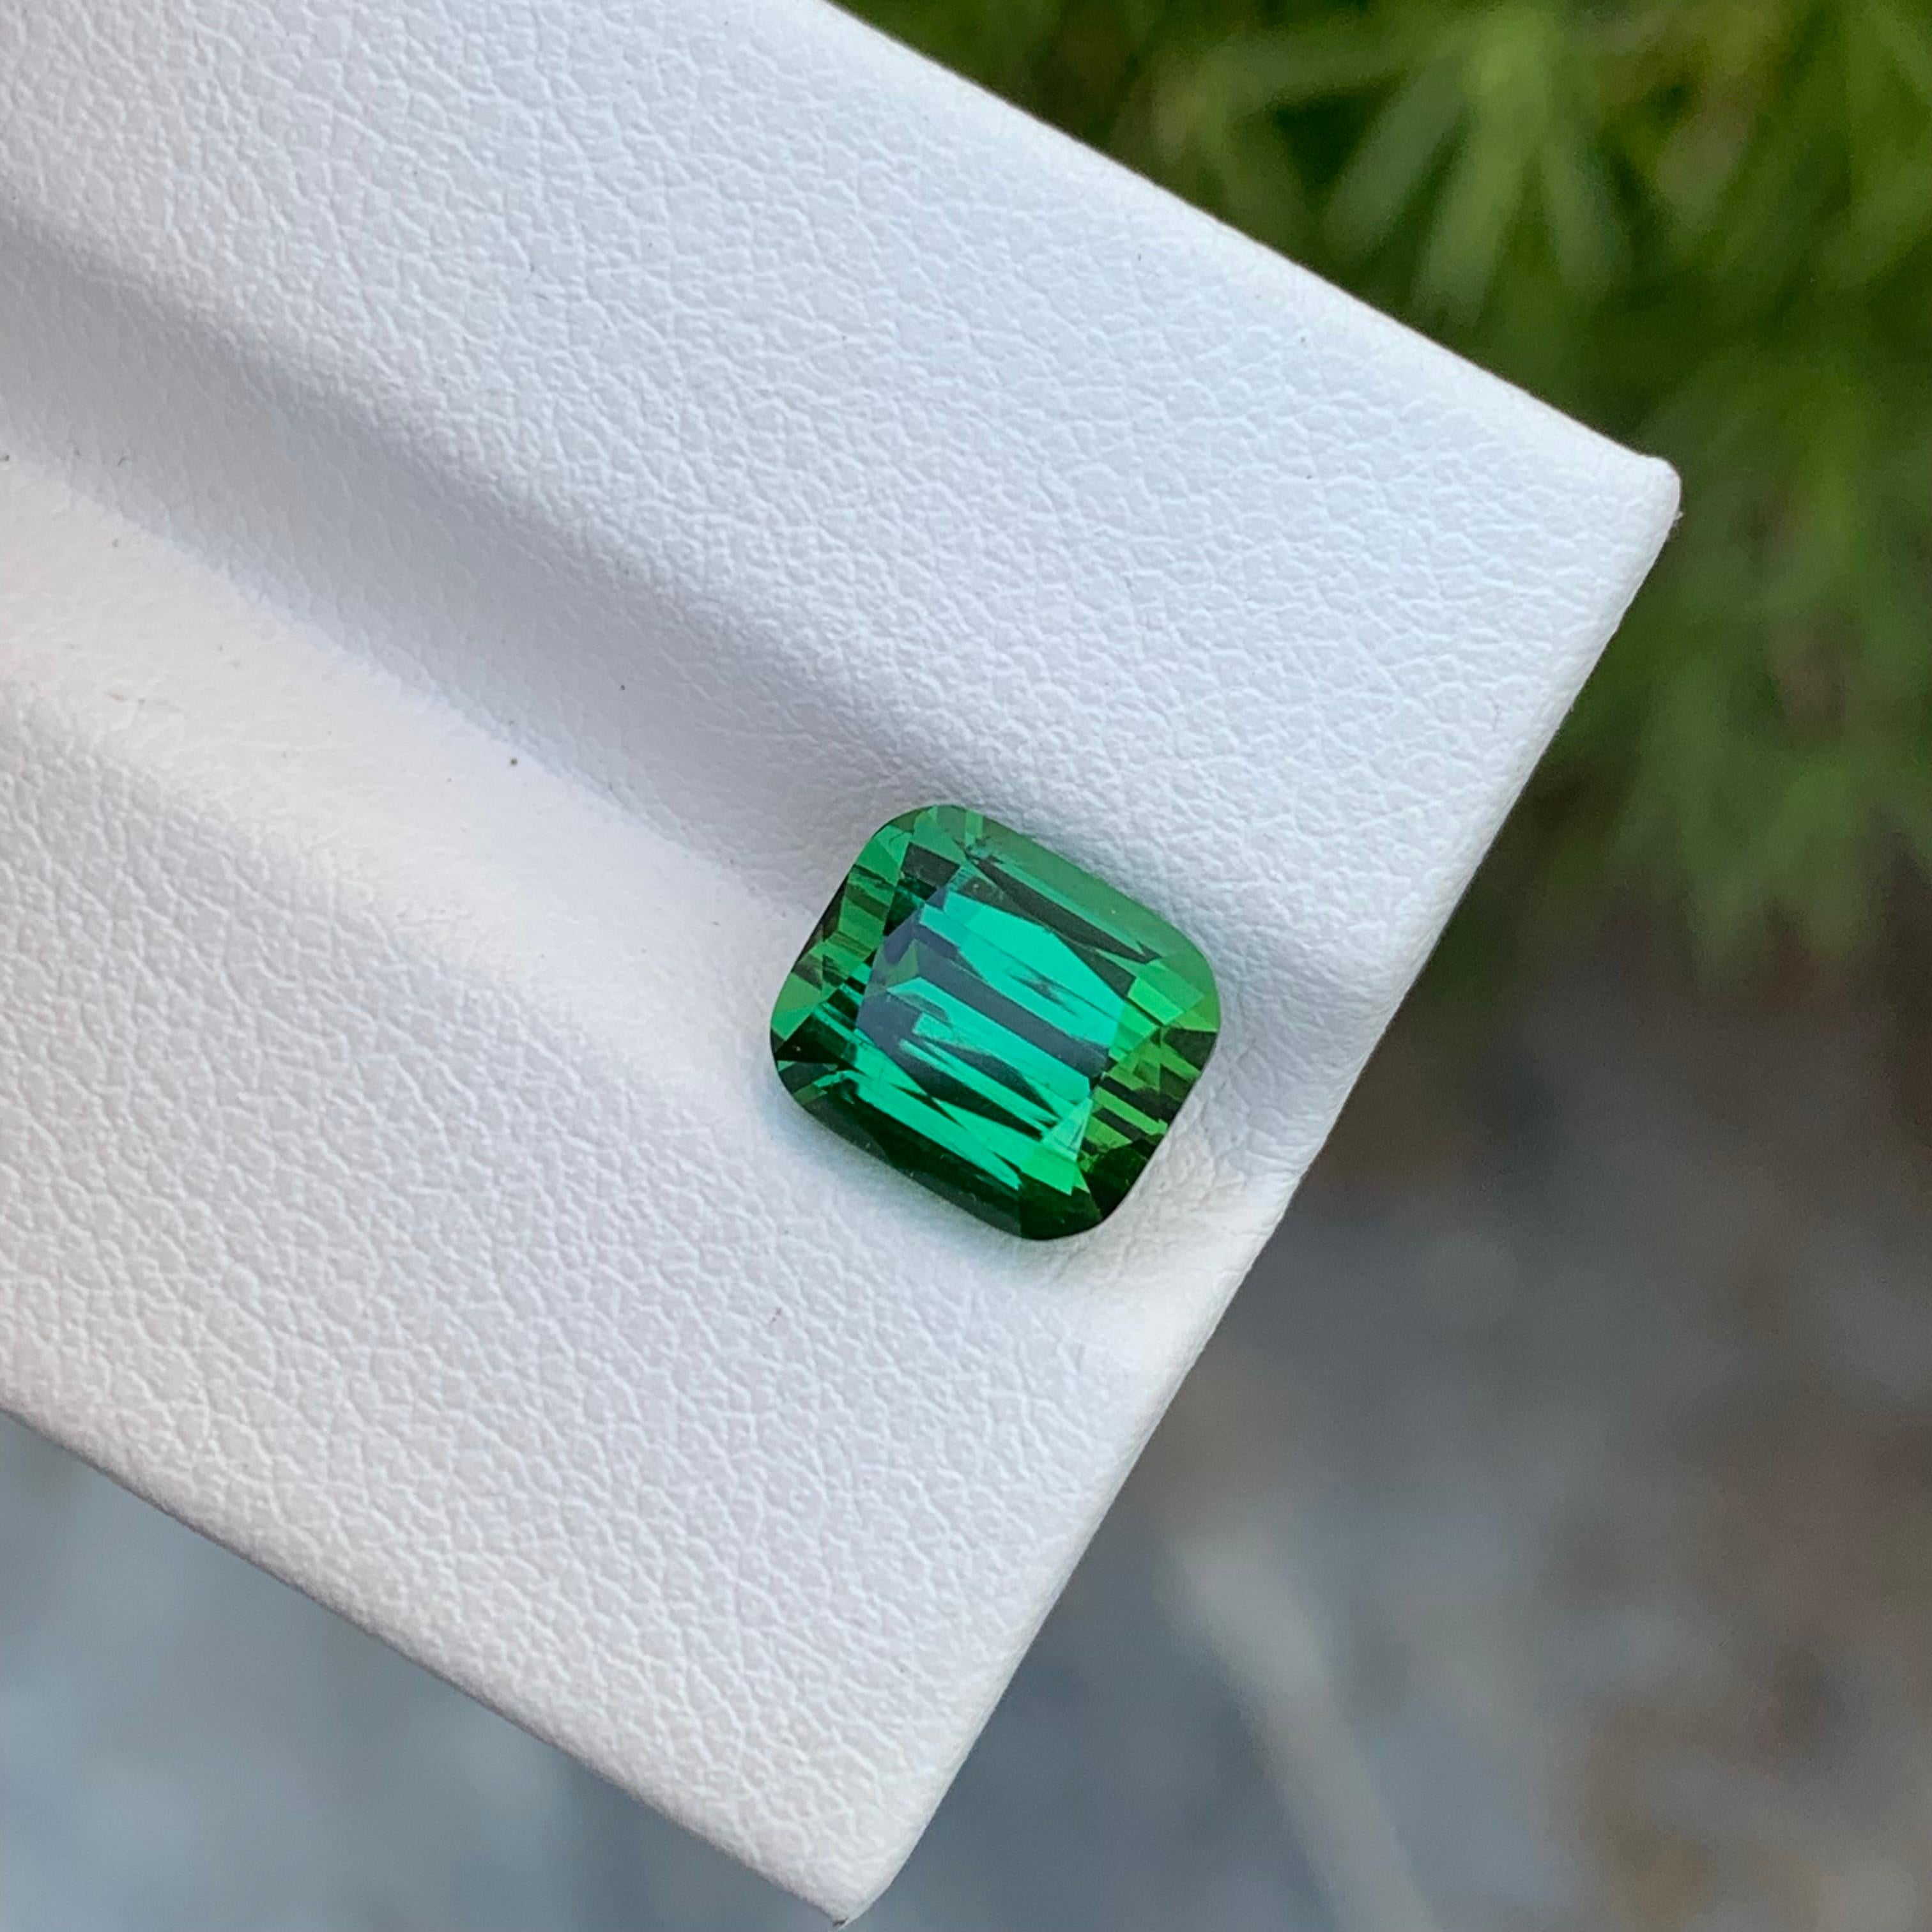 Loose Green Lagoon Tourmaline

Weight: 3.40 Carats
Dimension: 8.3 x 7.2 x 6.5 Mm
Colour: Green Lagoon
Origin: Afghanistan
Certificate: On Demand
Treatment: Non

Tourmaline is a captivating gemstone known for its remarkable variety of colors, making